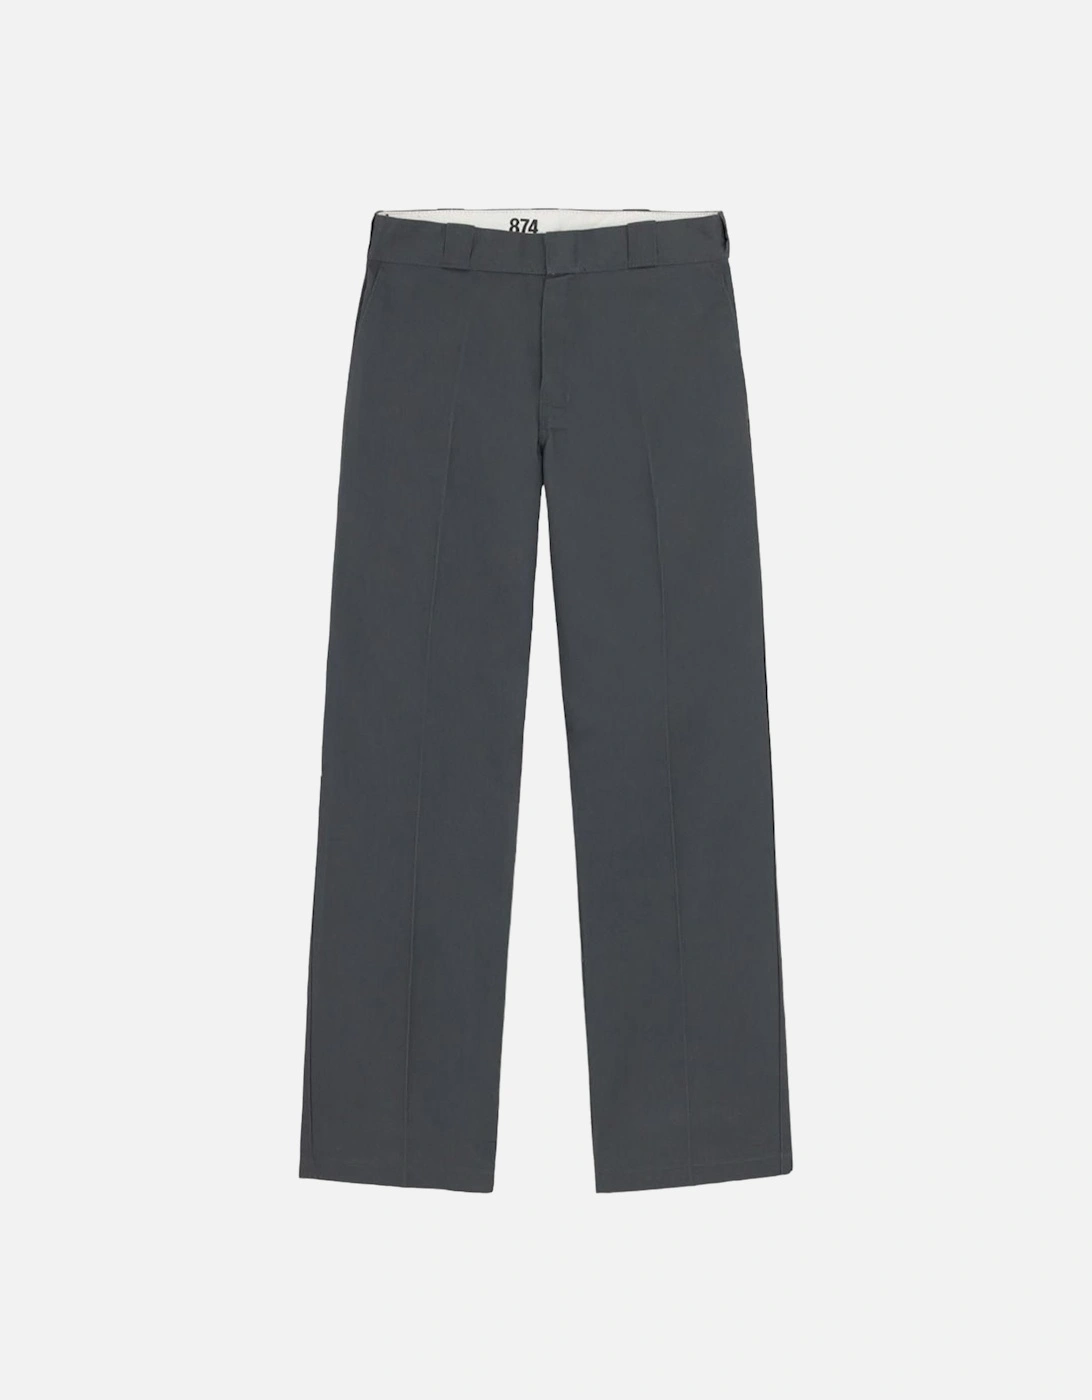 WP874 Work Pant - Charcoal Grey, 3 of 2